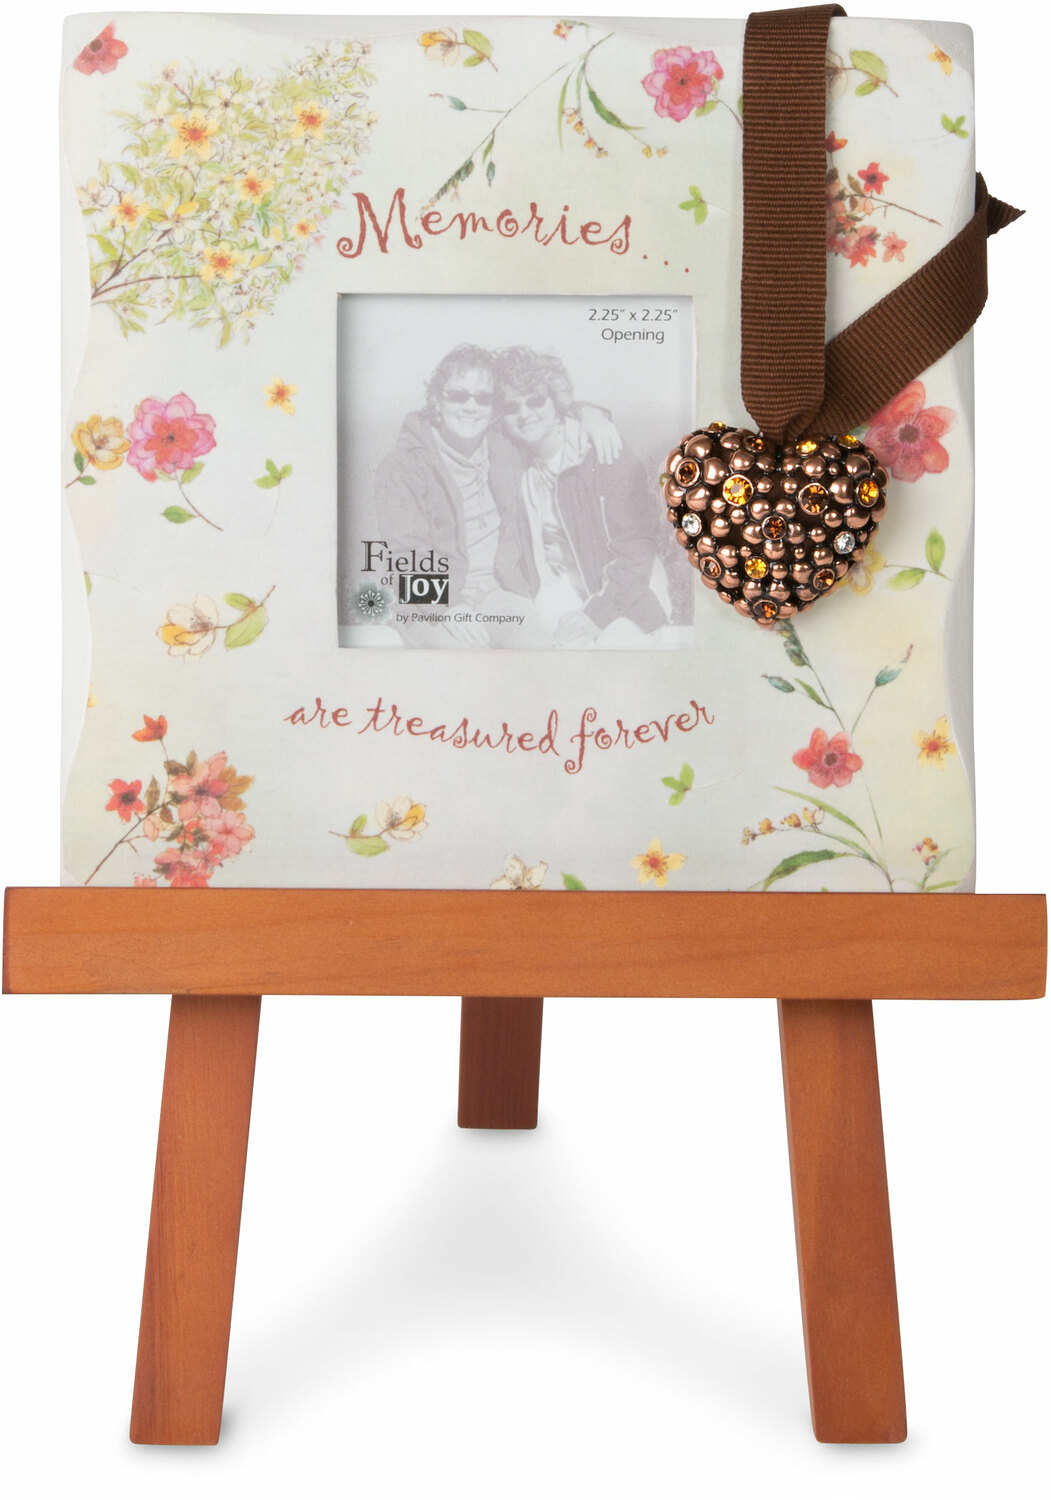 Memories by Fields of Joy - Memories - 5.5" x 5.5" Mini Frame with Easel